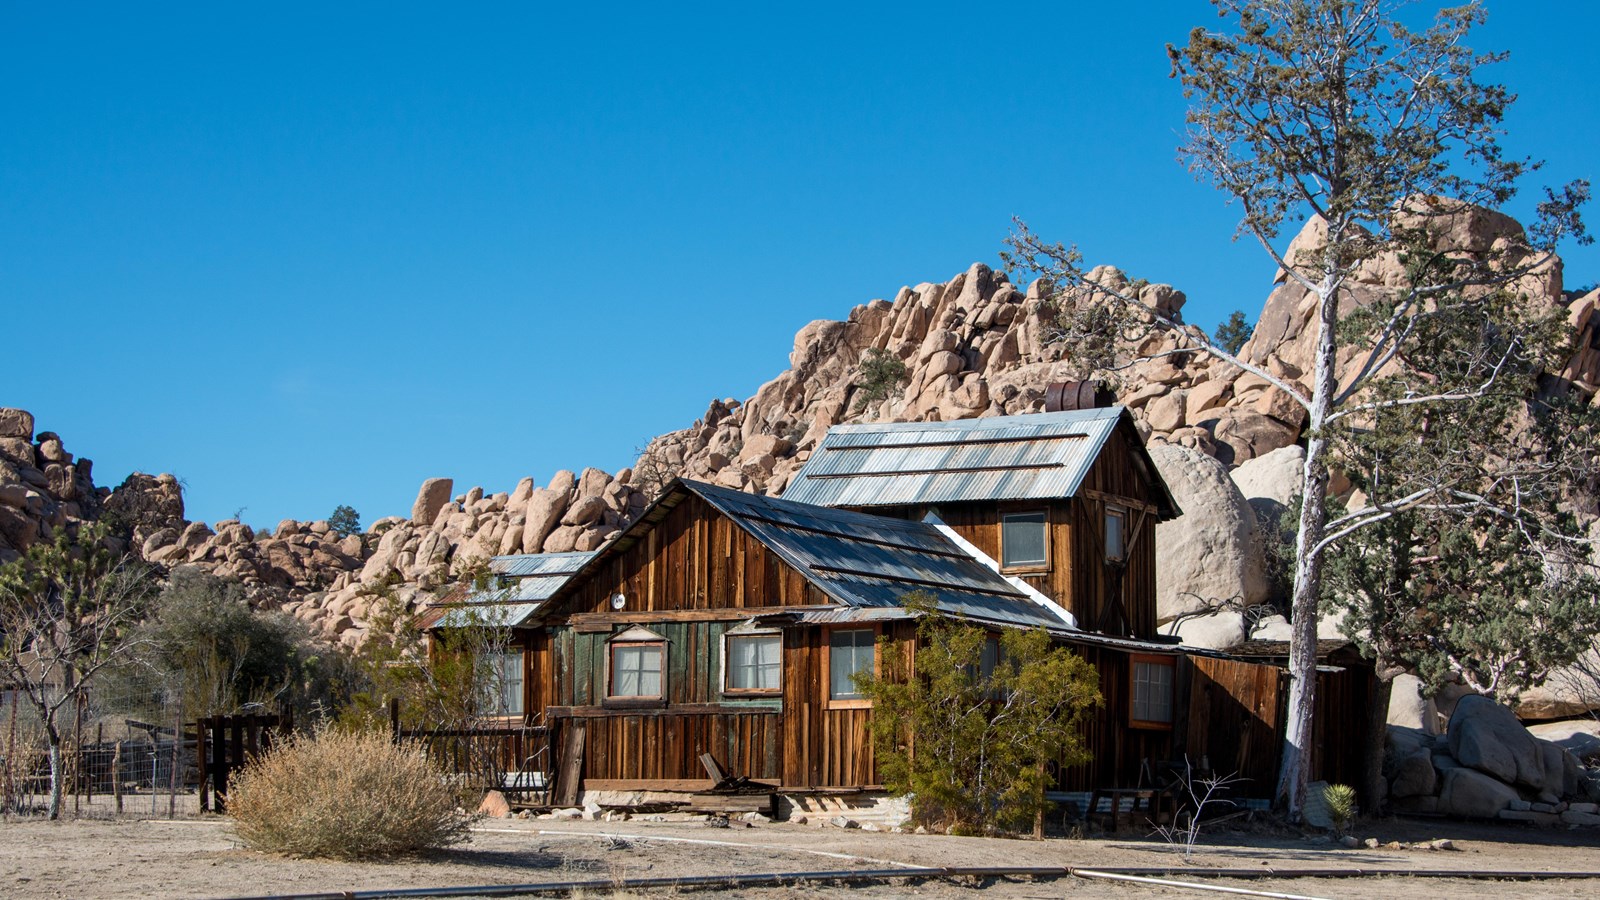 An old wooden two story ranch house with a metal roof in front of a large rock formation.